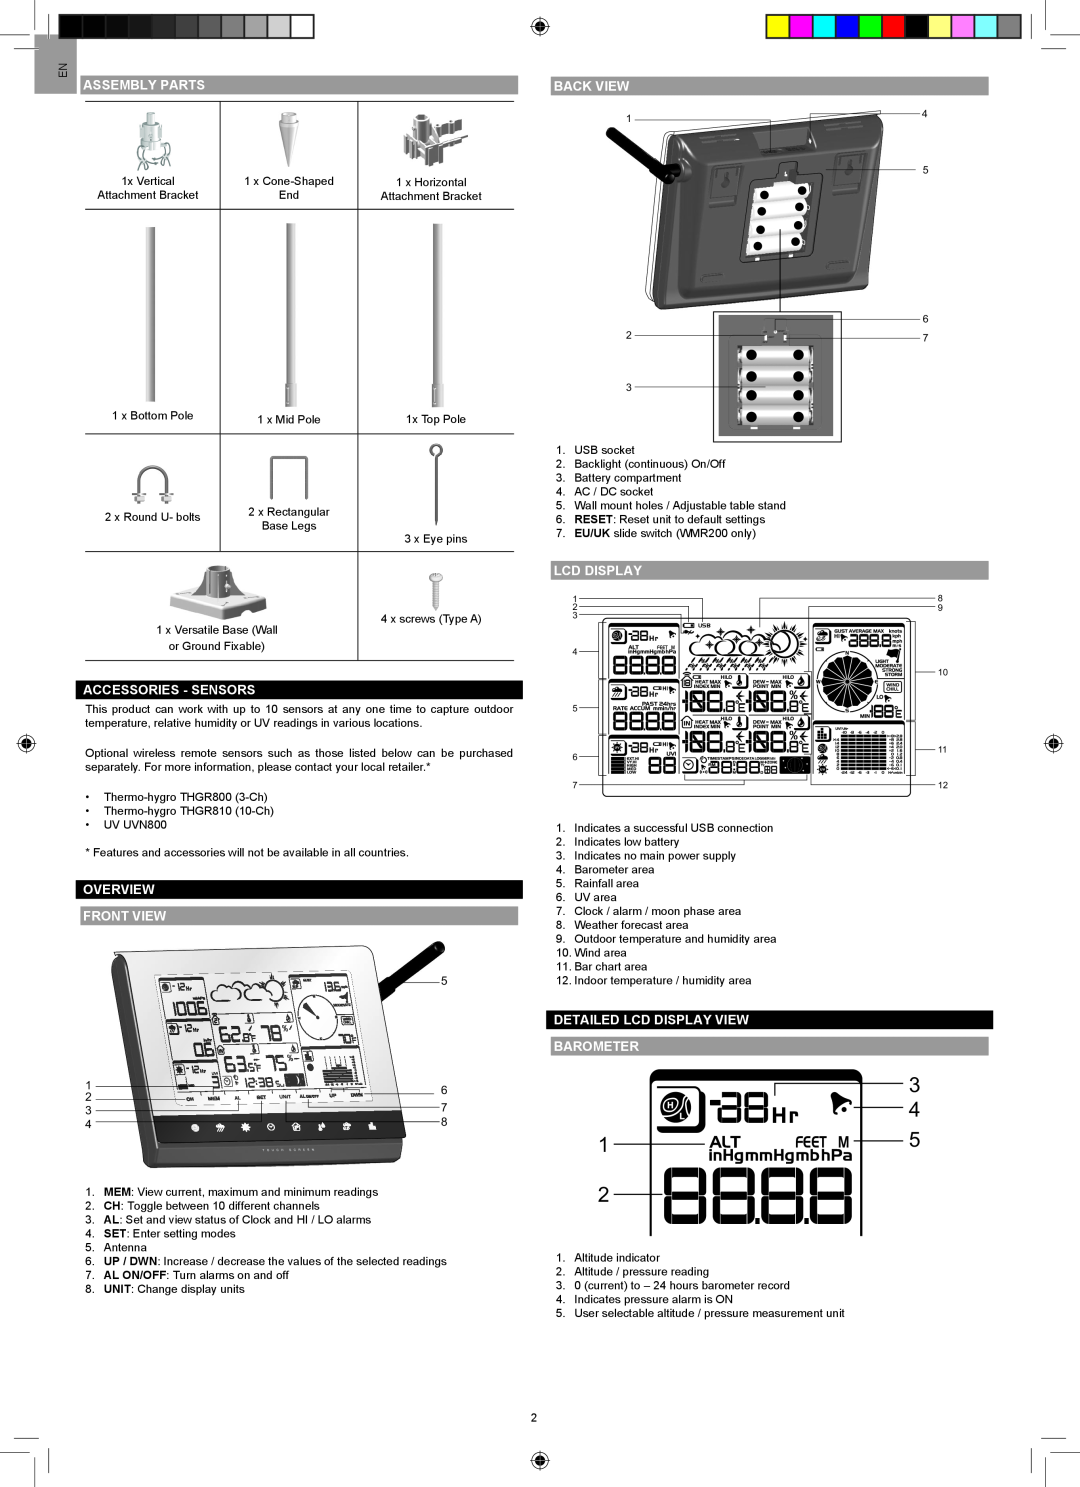 Oregon Scientific WMR200A Assembly Parts, Back View, Accessories - Sensors, Lcd Display, Overview Front View, Feet M 